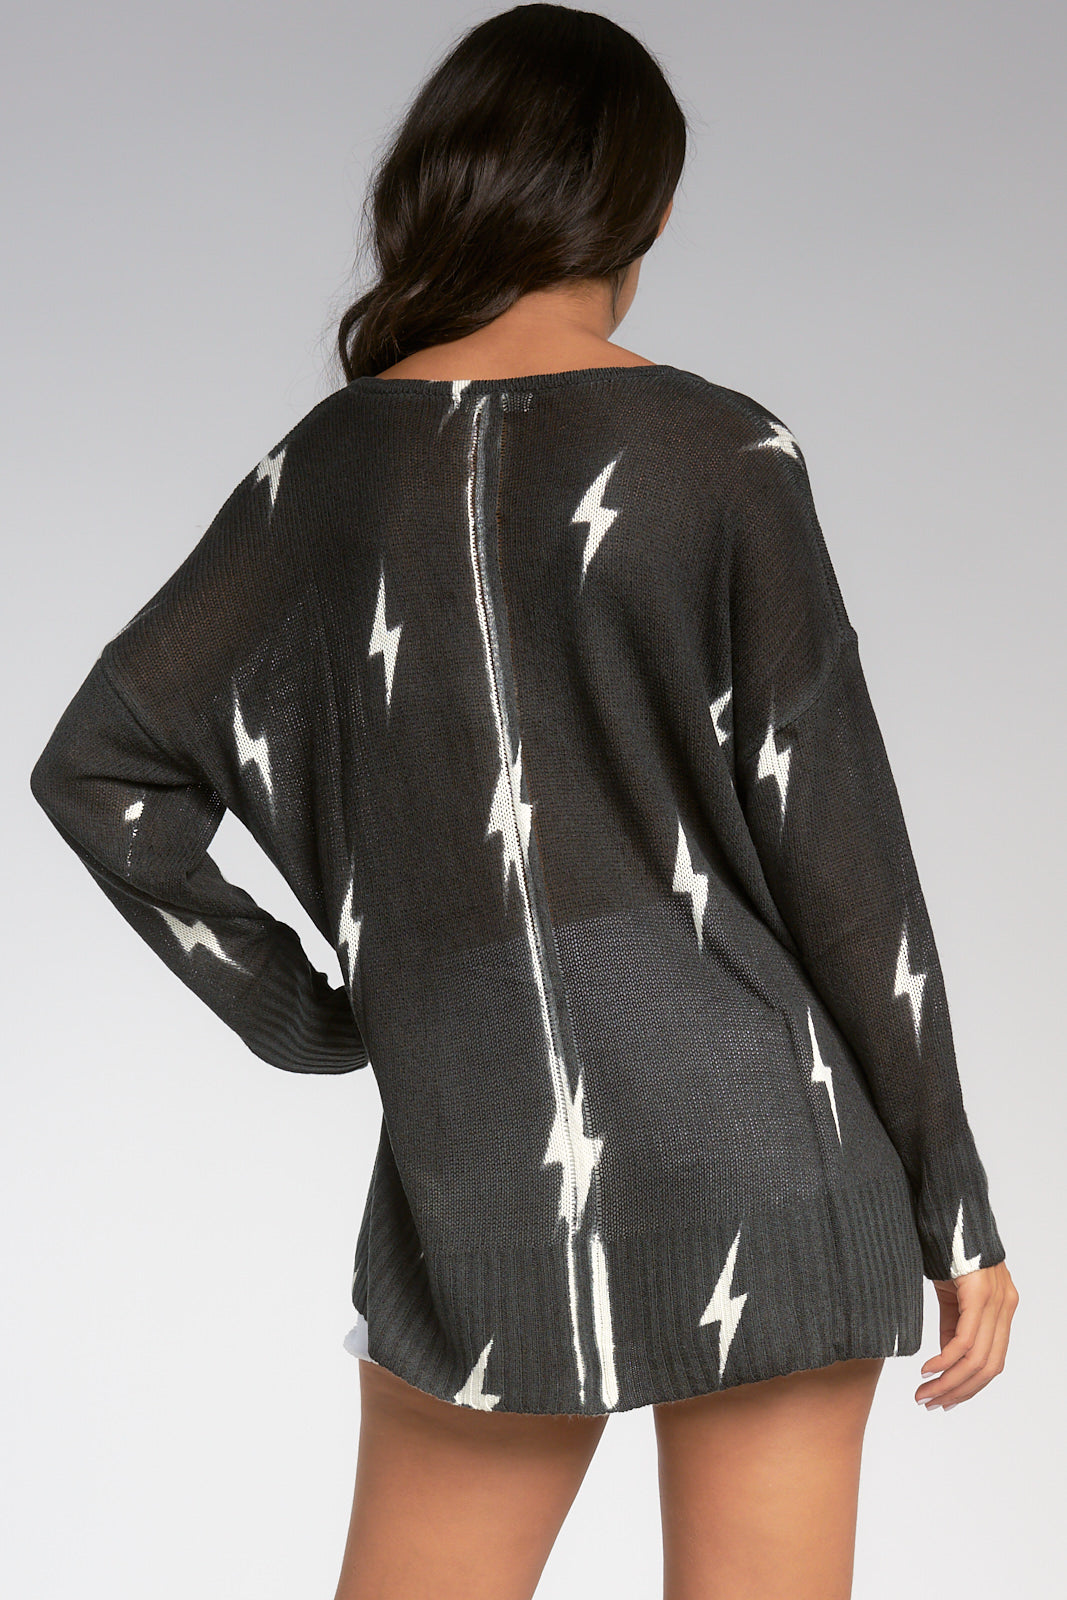 THUNDER BOLT SWEATER - Kingfisher Road - Online Boutique